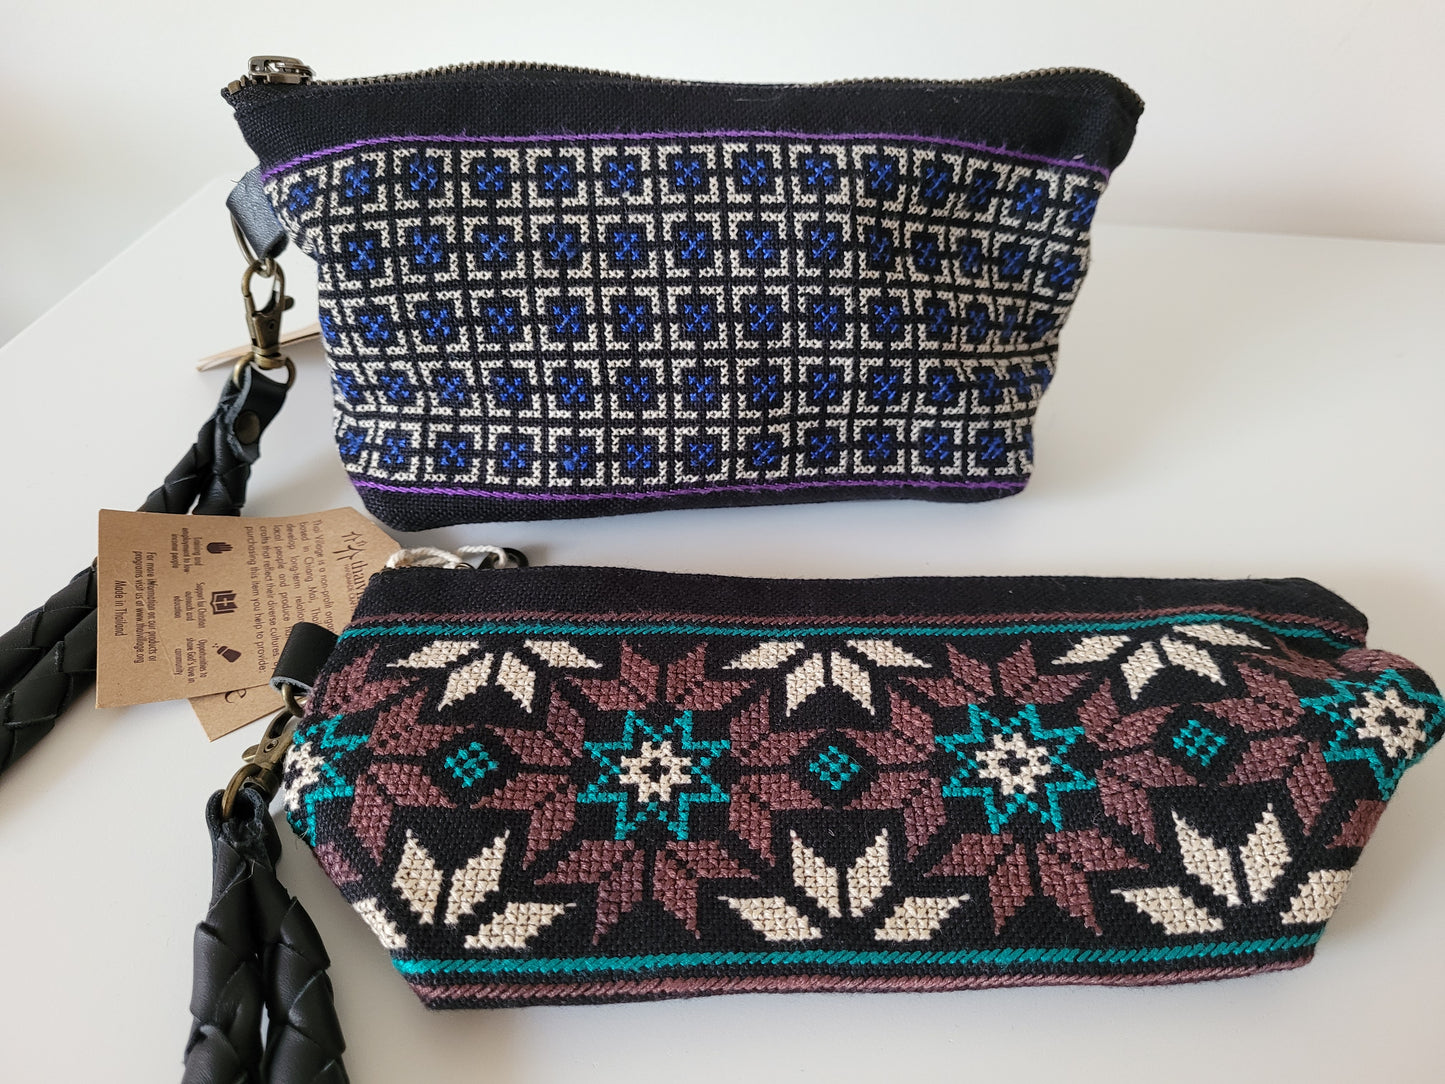 Yarra Leather and Hmong Clutch